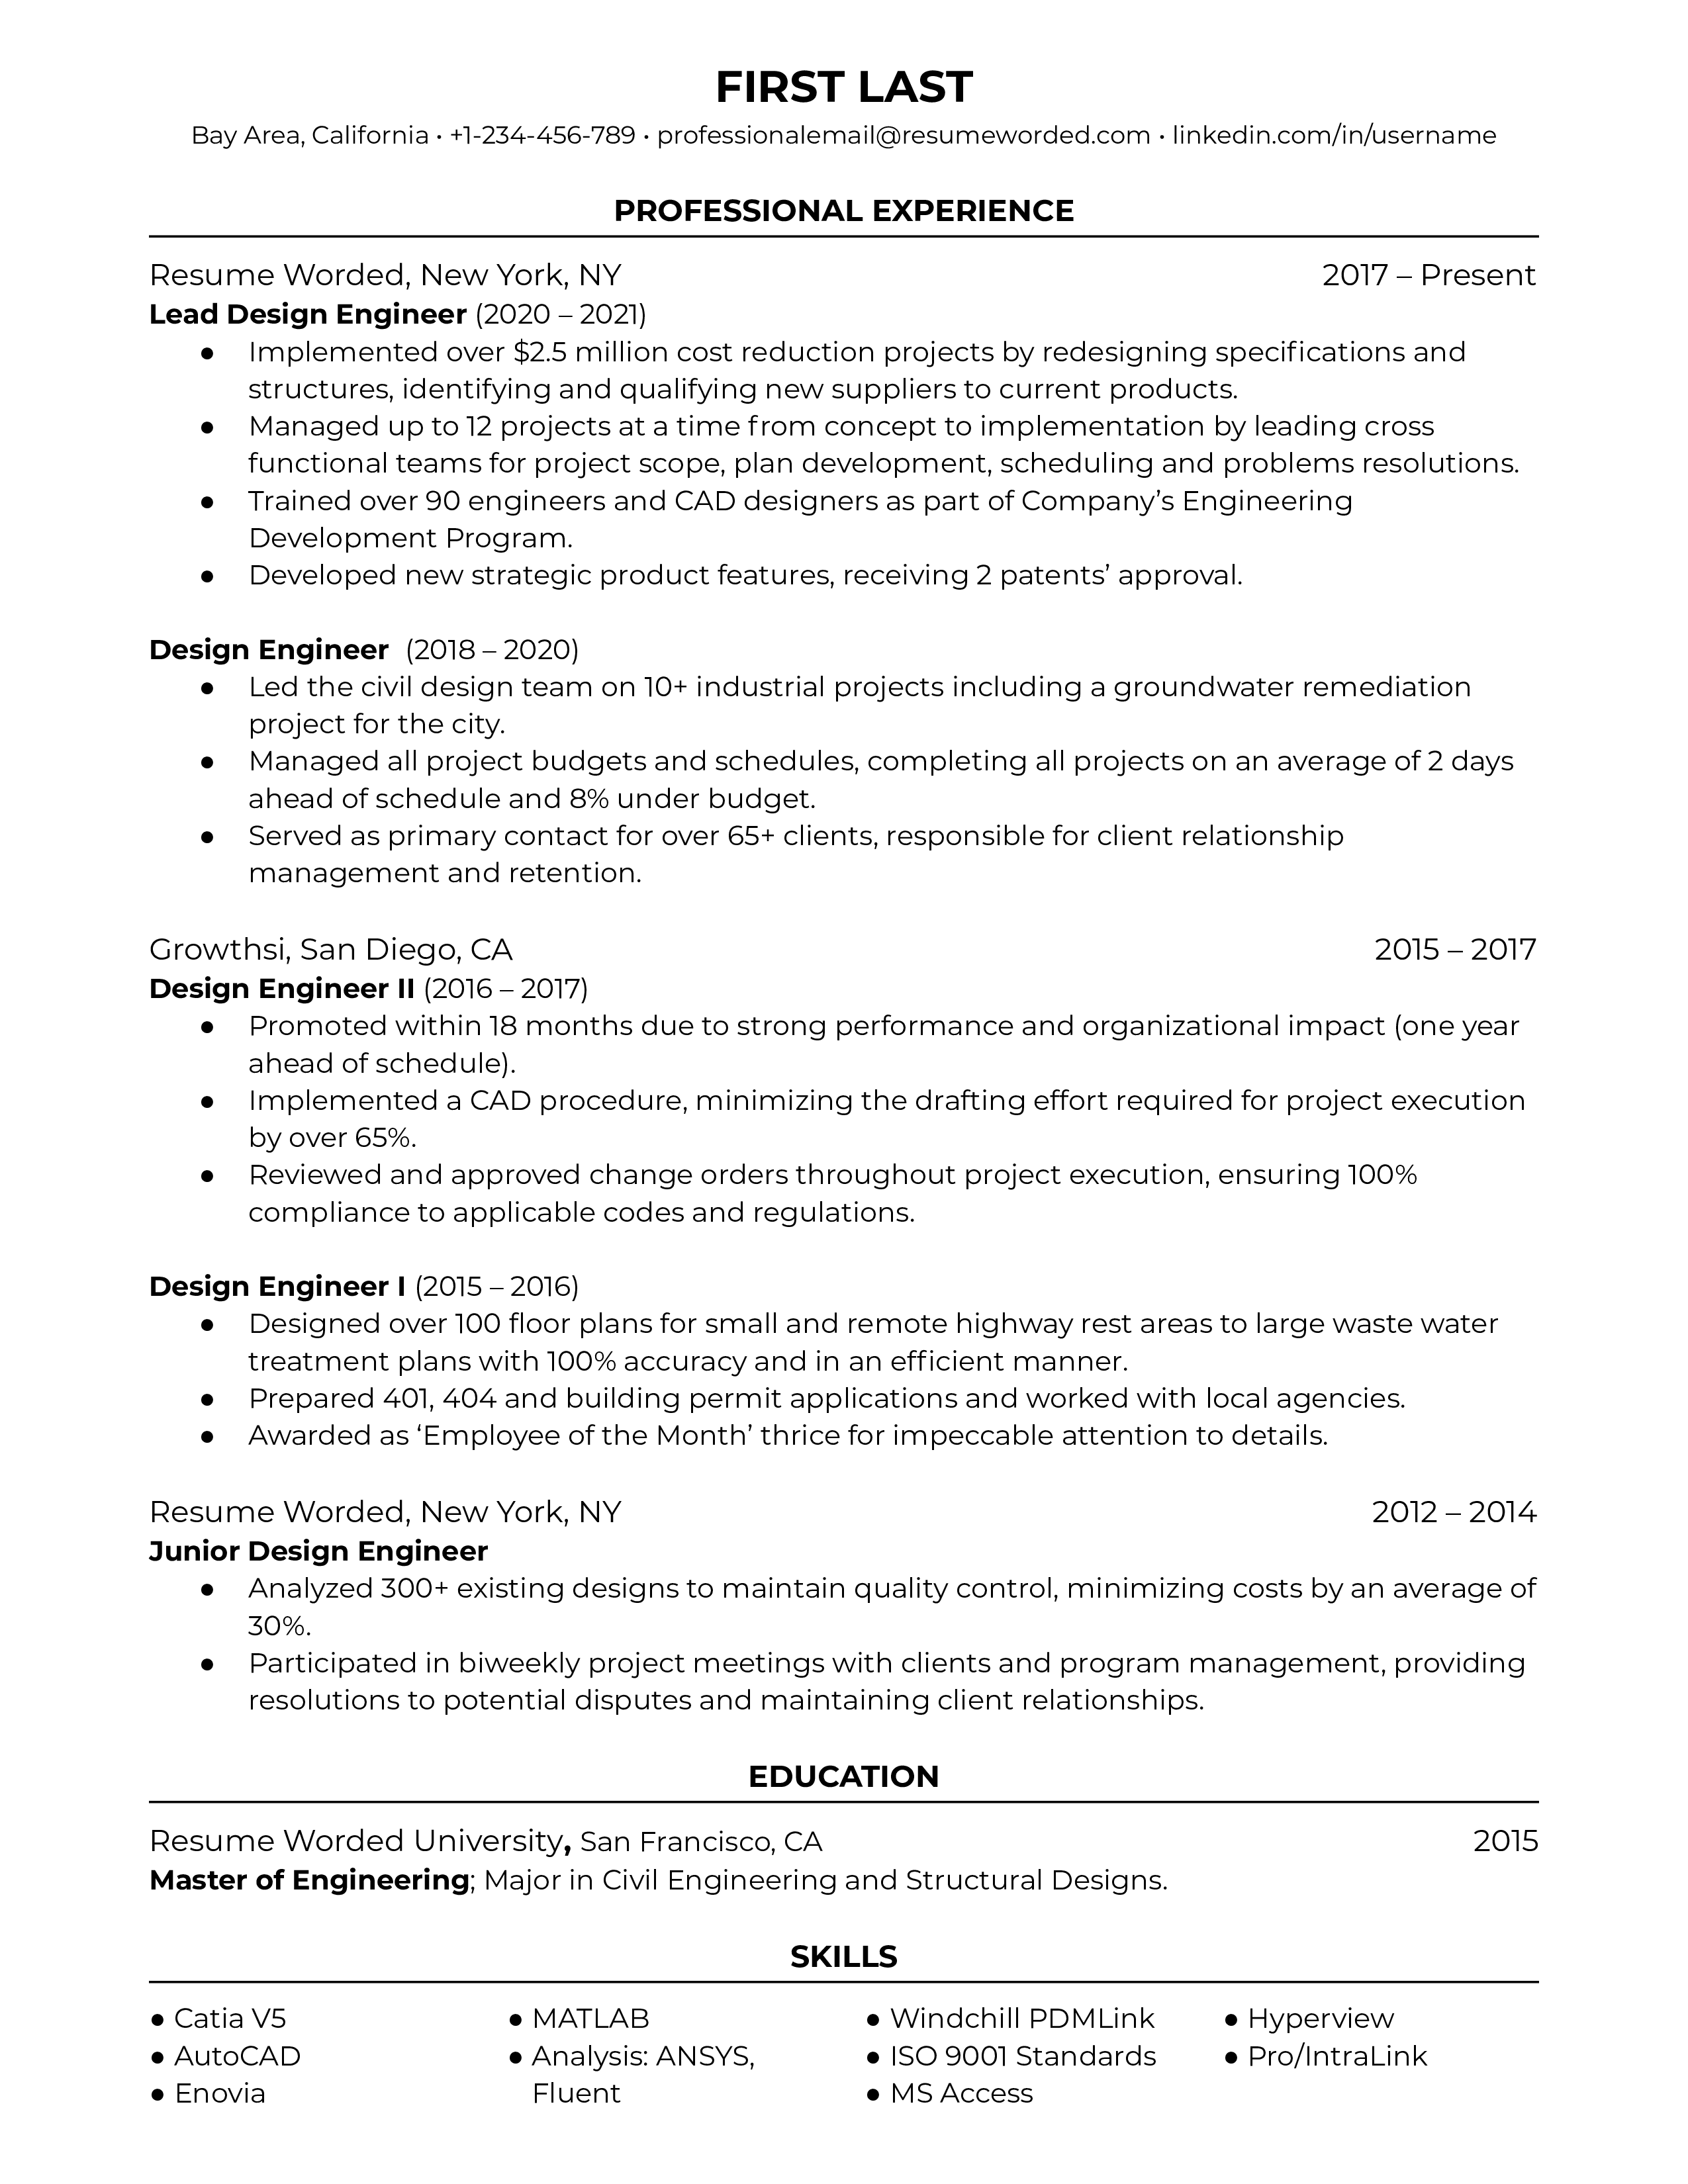 Design engineer resume sample template featuring strong action verbs and highlighting career growth